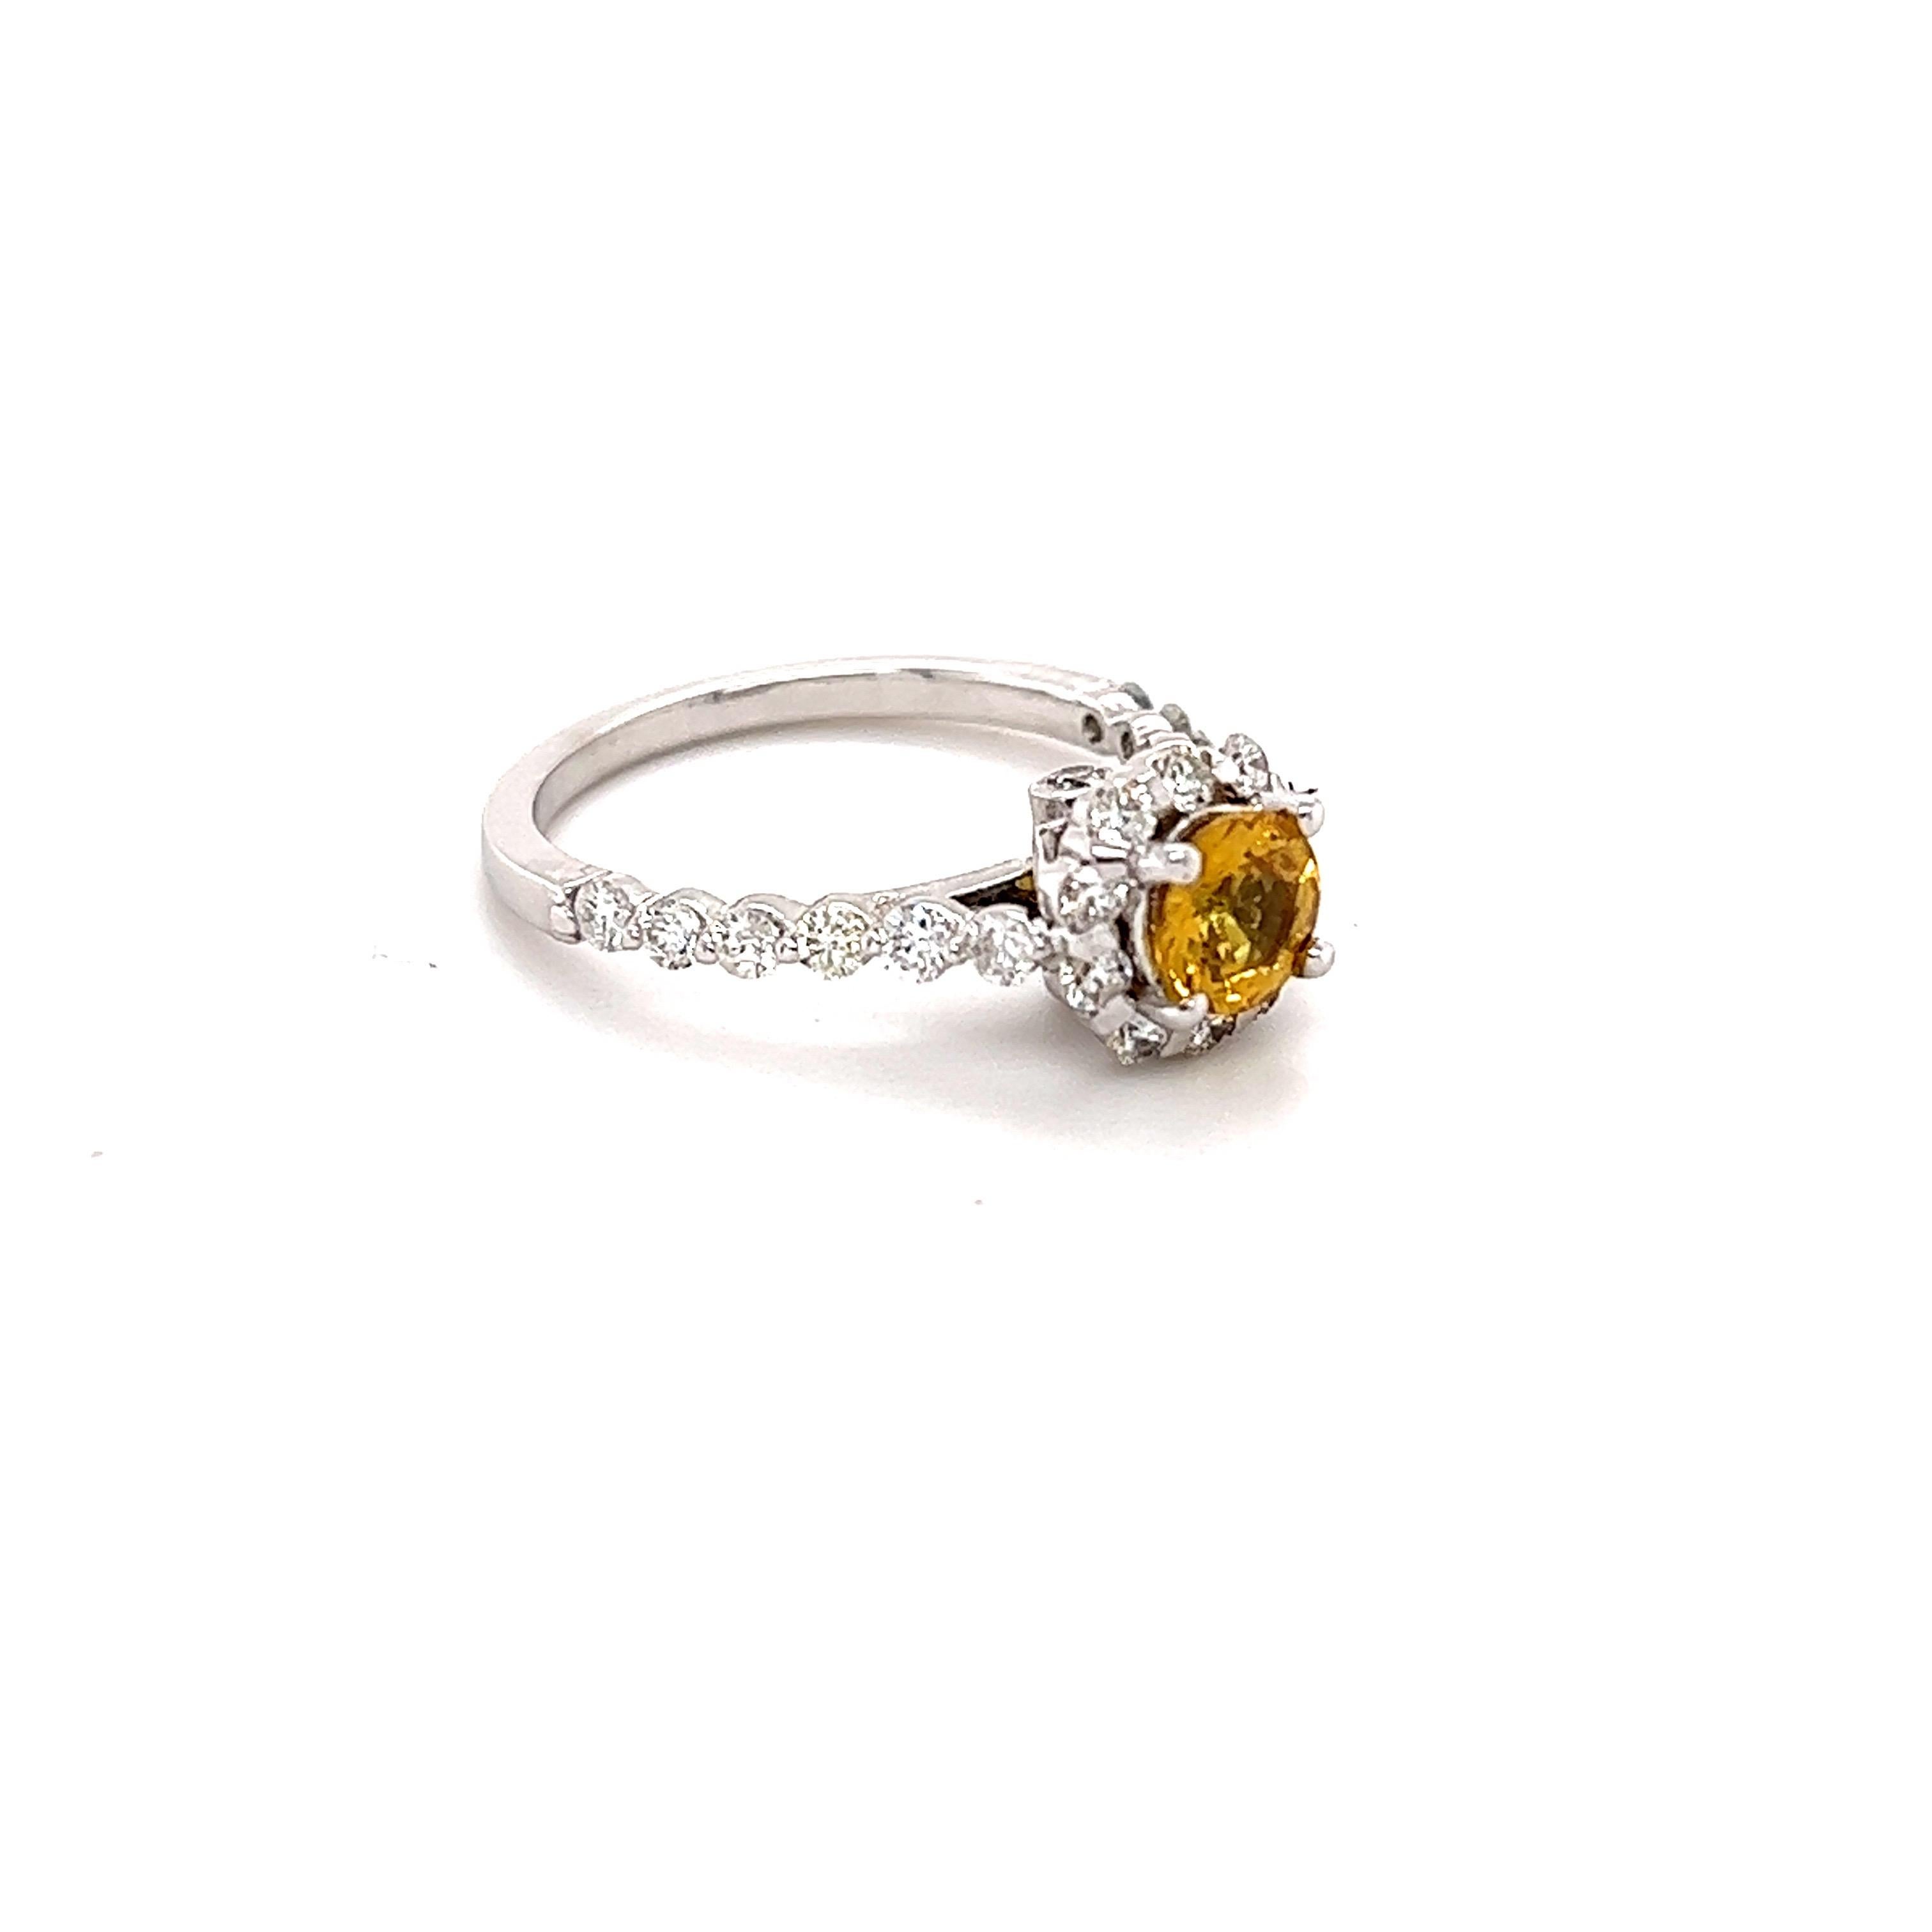 This beautiful ring has a Natural Round Cut Yellow Sapphire with Heat that weighs 0.72 Carats. The measurements of the Yellow Sapphire measures at approximately 5 mm. 

The ring is embellished with 18 Round Cut Diamonds that weigh 0.65 Carats with a